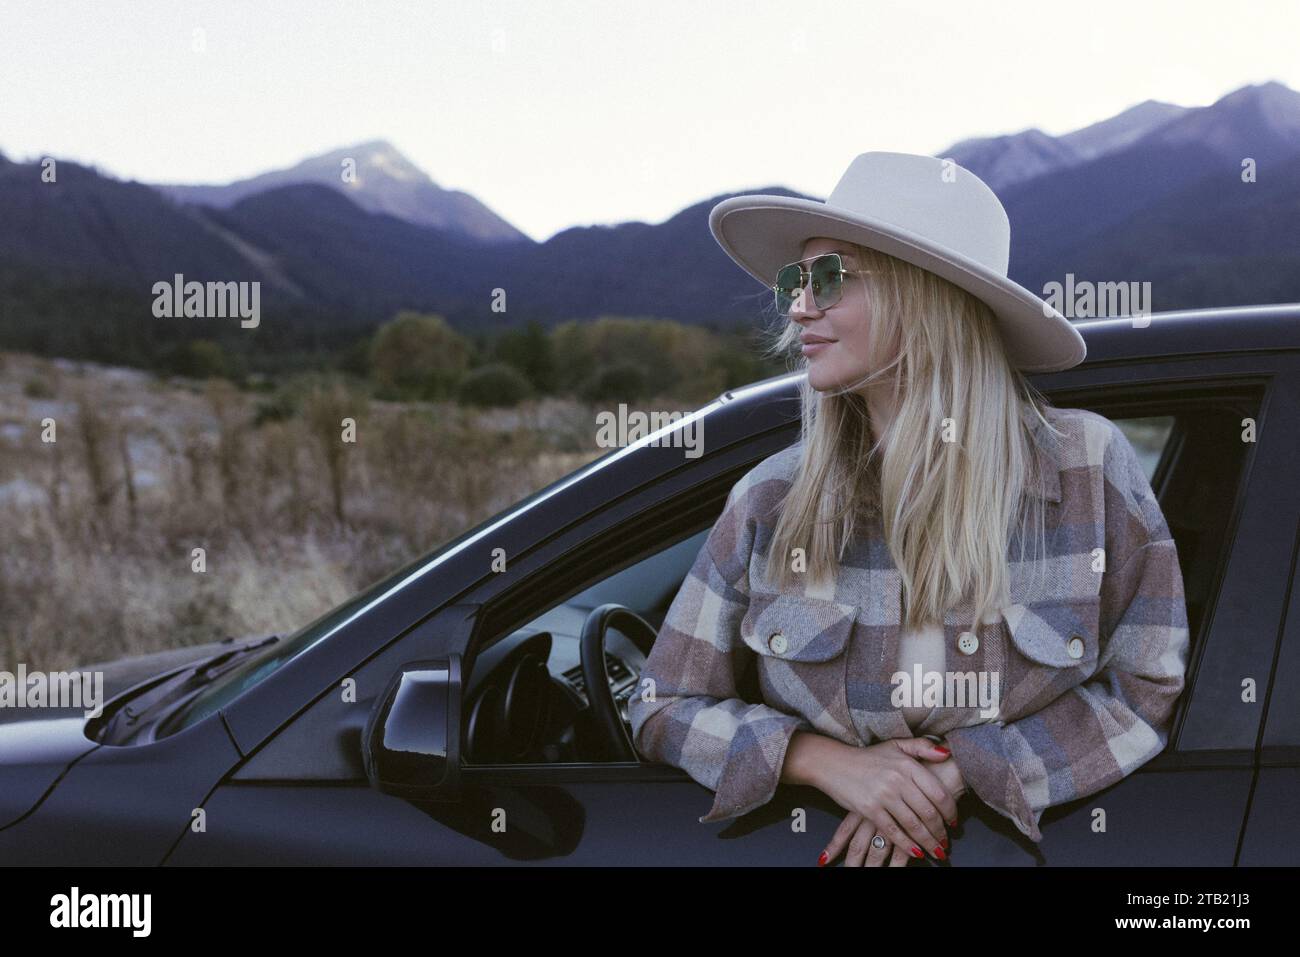 A woman traveler sits in a car against the background of mountains. Stock Photo